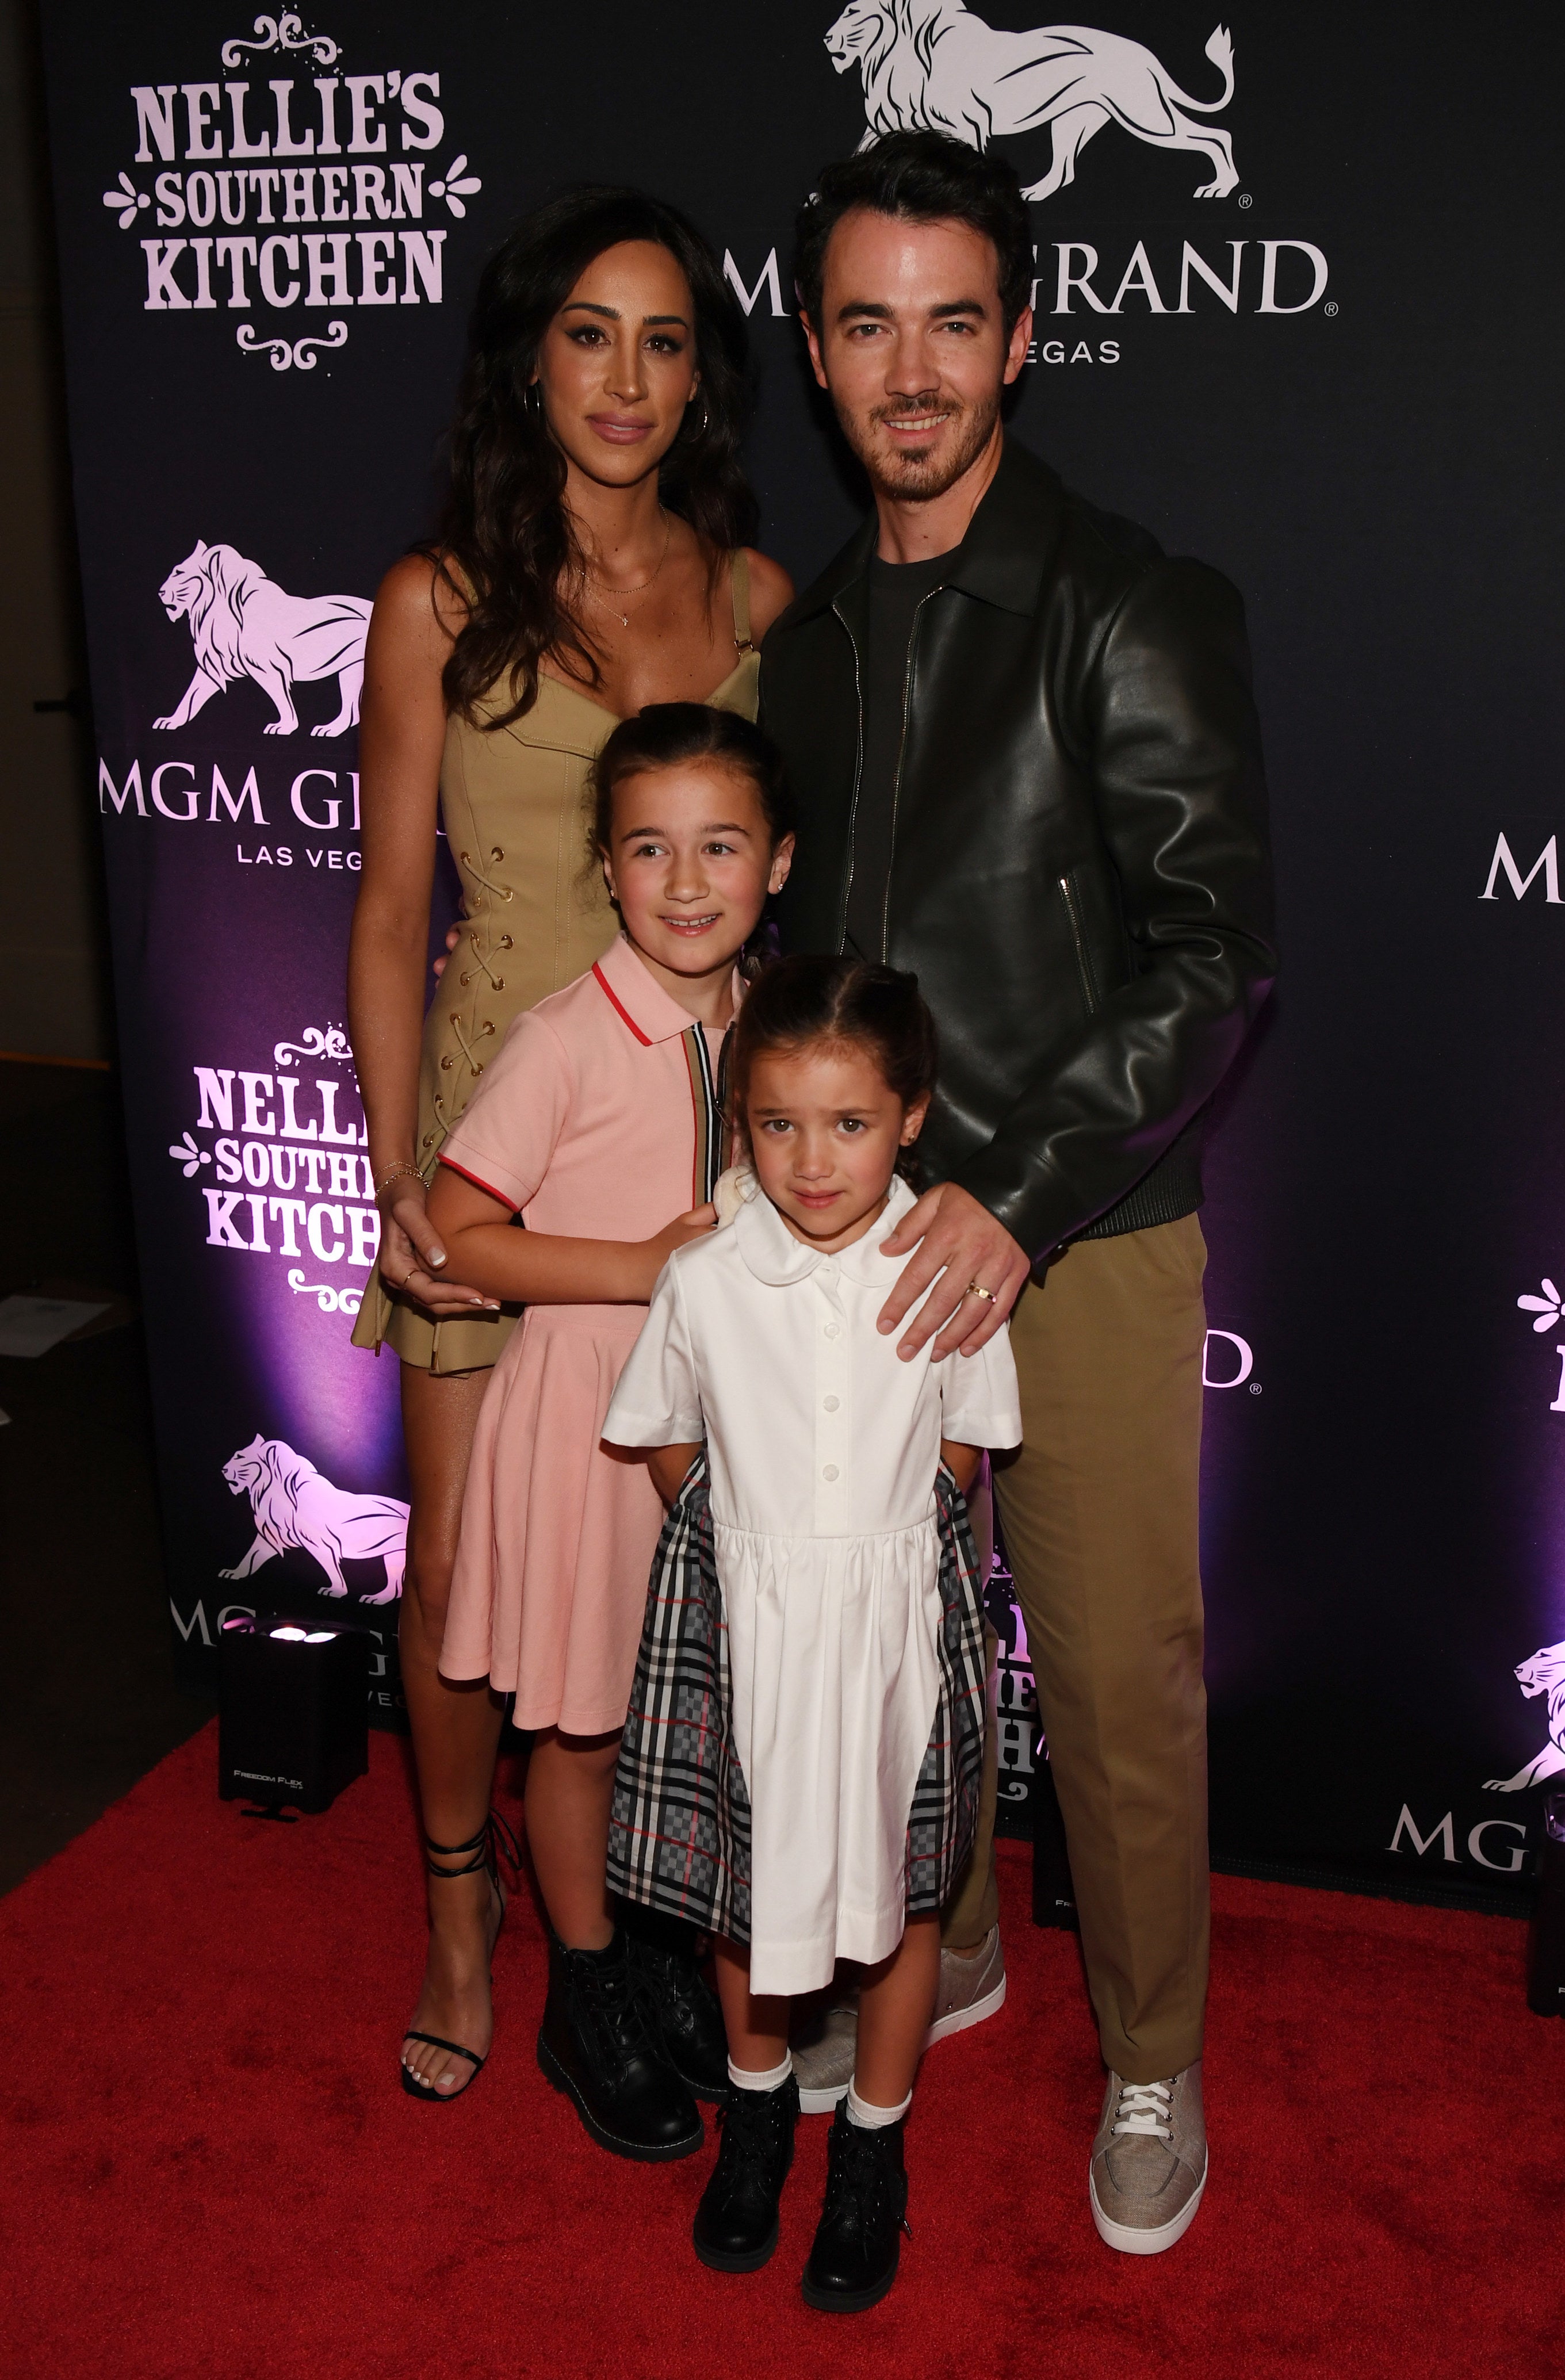 Kevin with his family on the red carpet